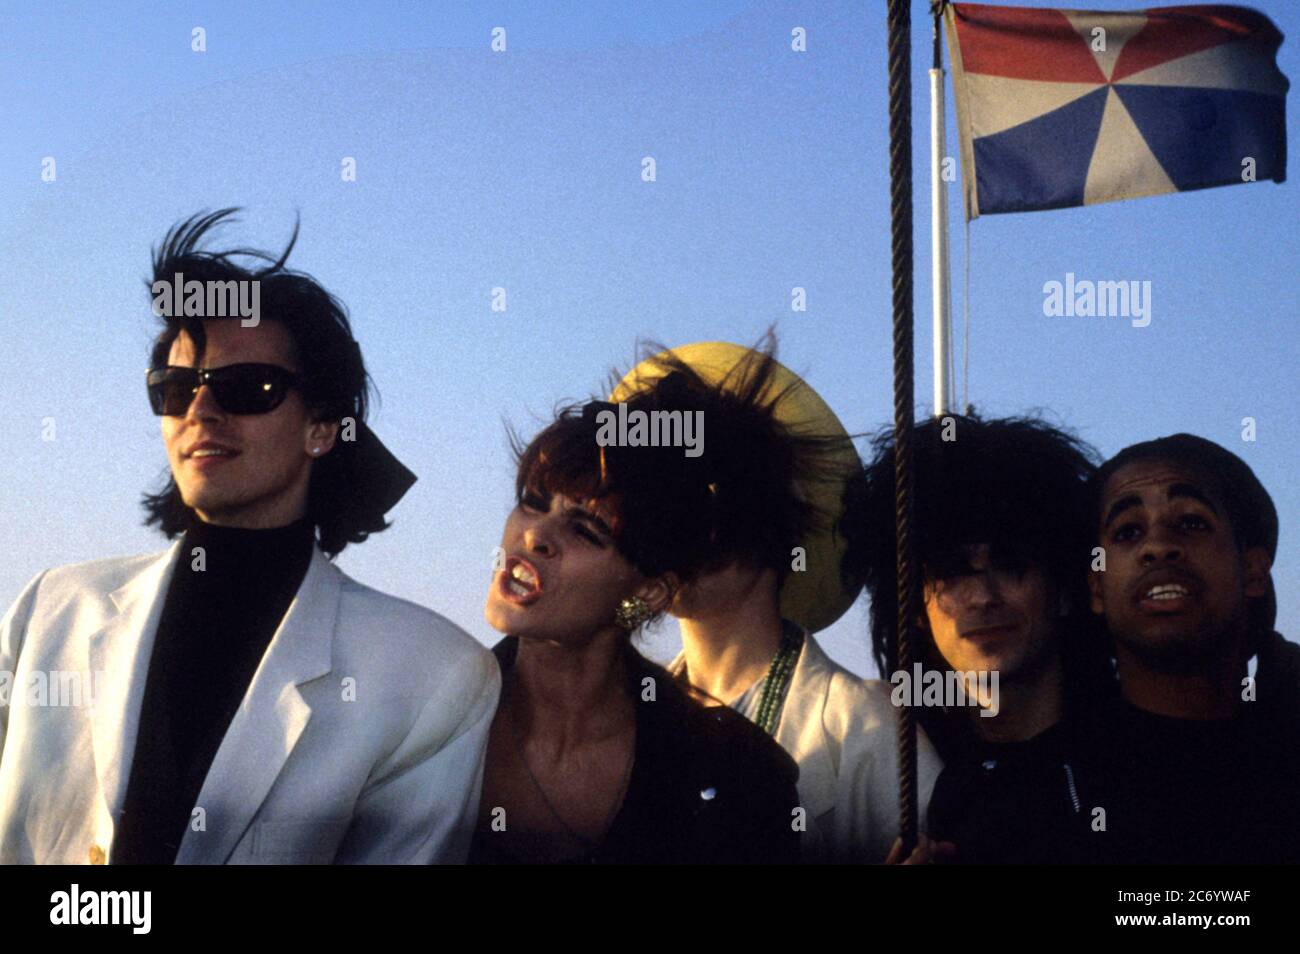 John Taylor, background singer, Nick Rhodes, Warren Cuccurullo and Sterling Campbell of Duran Duran at the photocall for the Big Electric Theater tour in Limeharbour on the Isle of Dogs. London, April 13, 1989 | usage worldwide Stock Photo